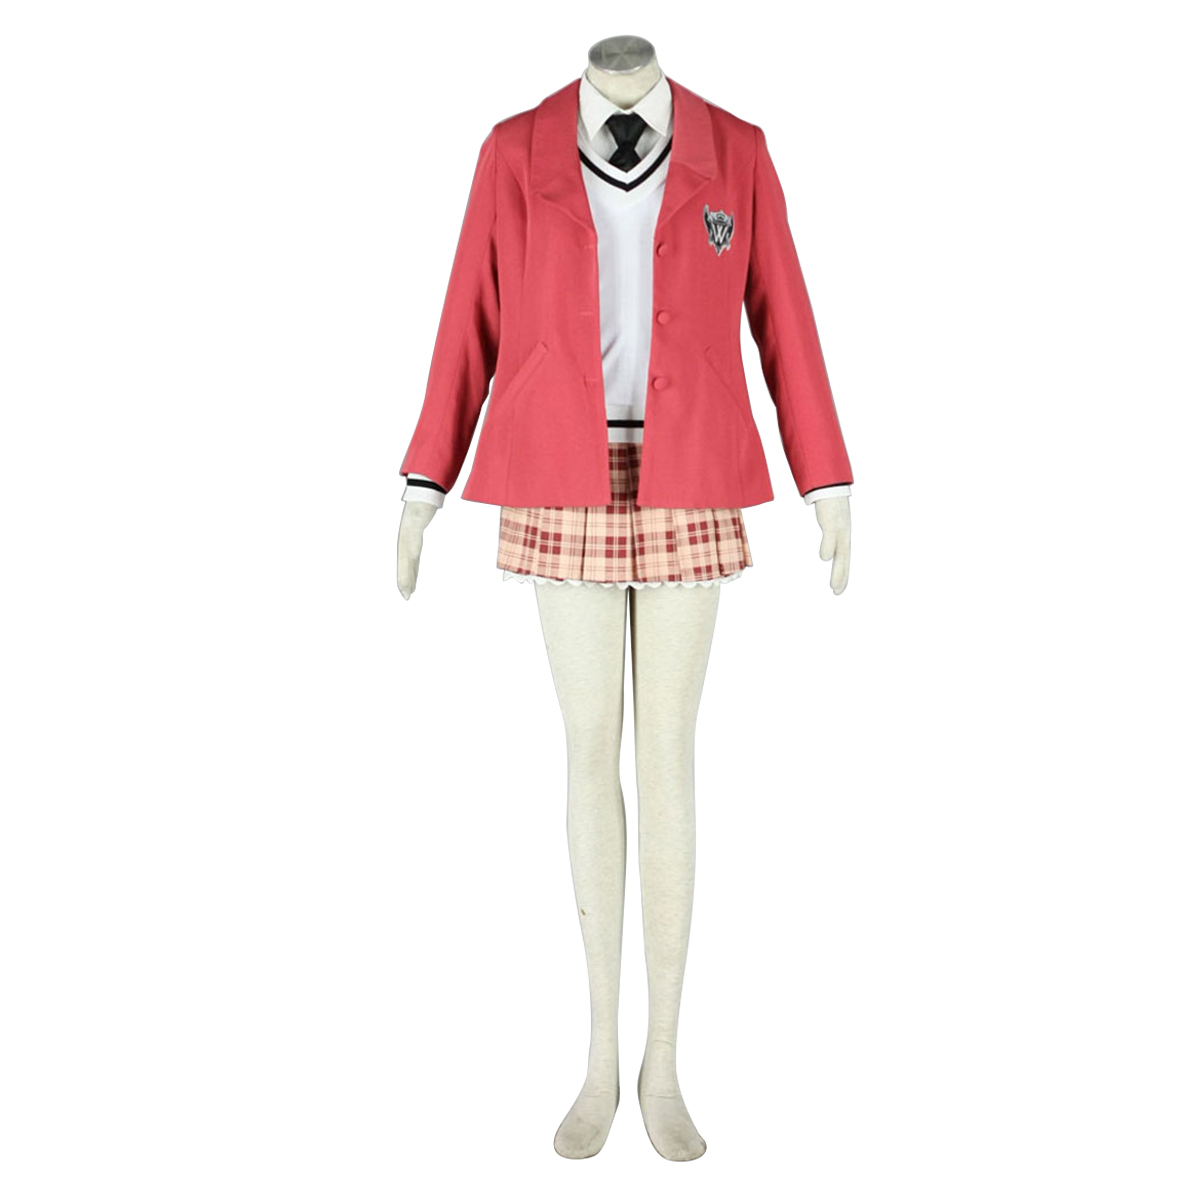 Axis Powers Hetalia Winter Female School Uniform 1 Anime Cosplay Costumes Outfit